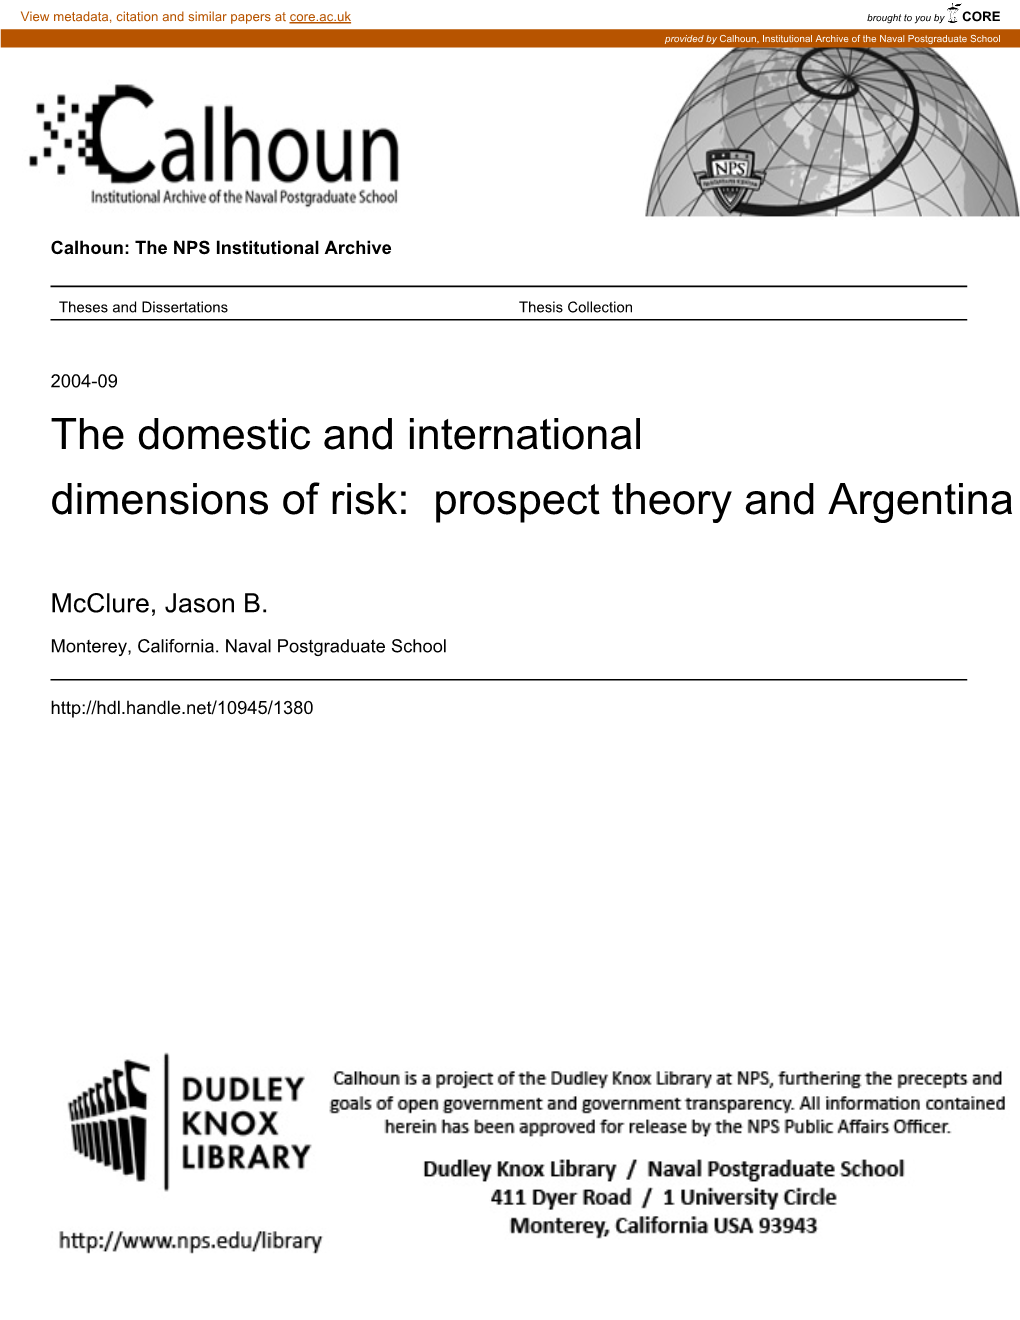 Prospect Theory and Argentina